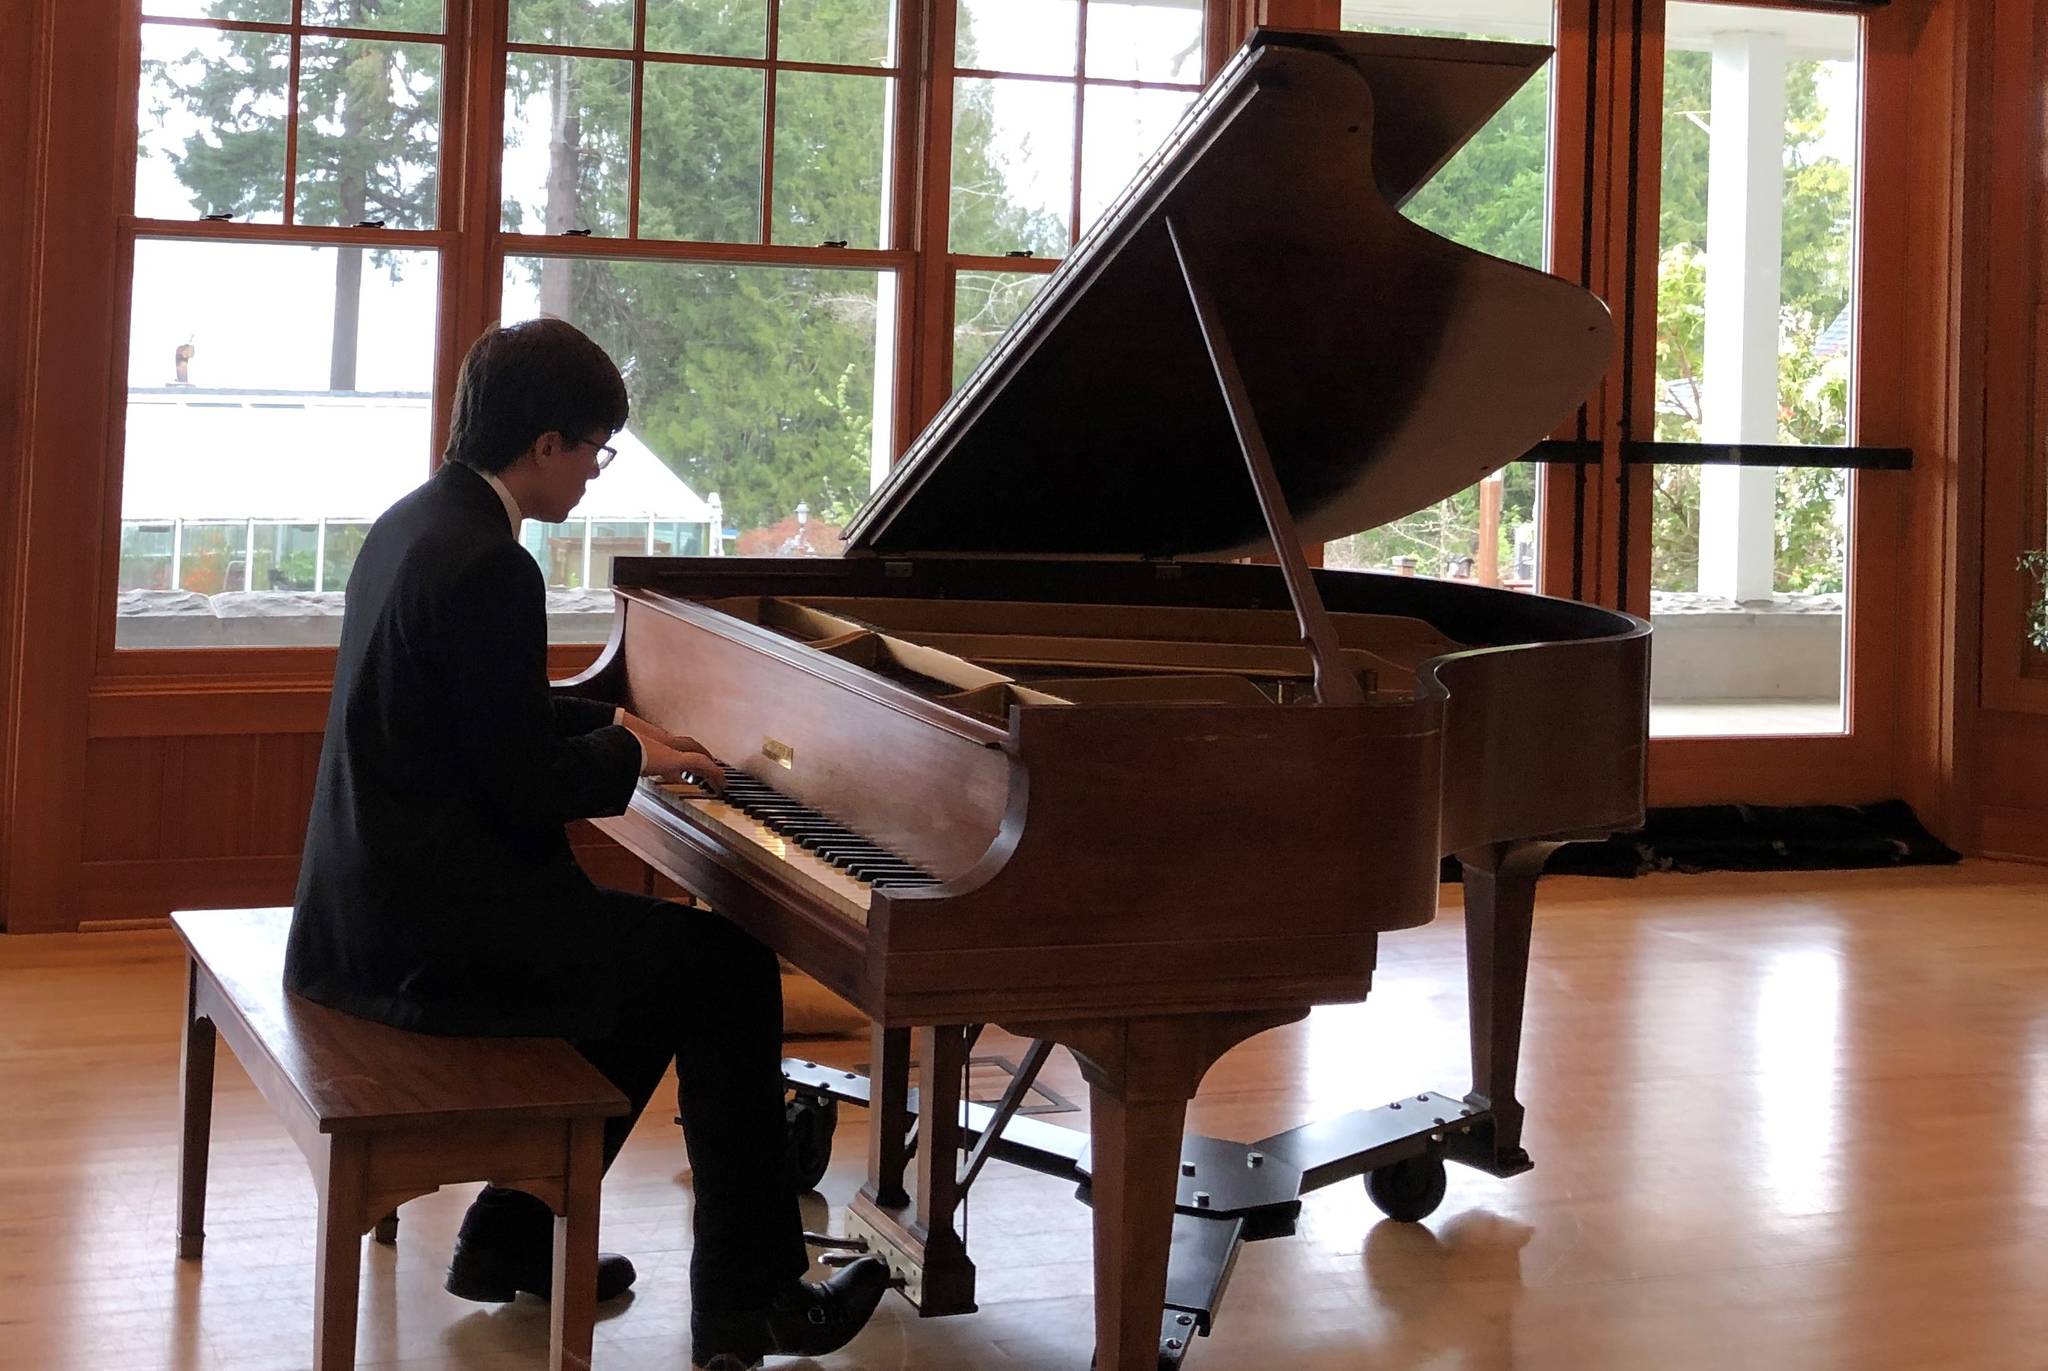 Local piano student earns honors, teaches other musicians